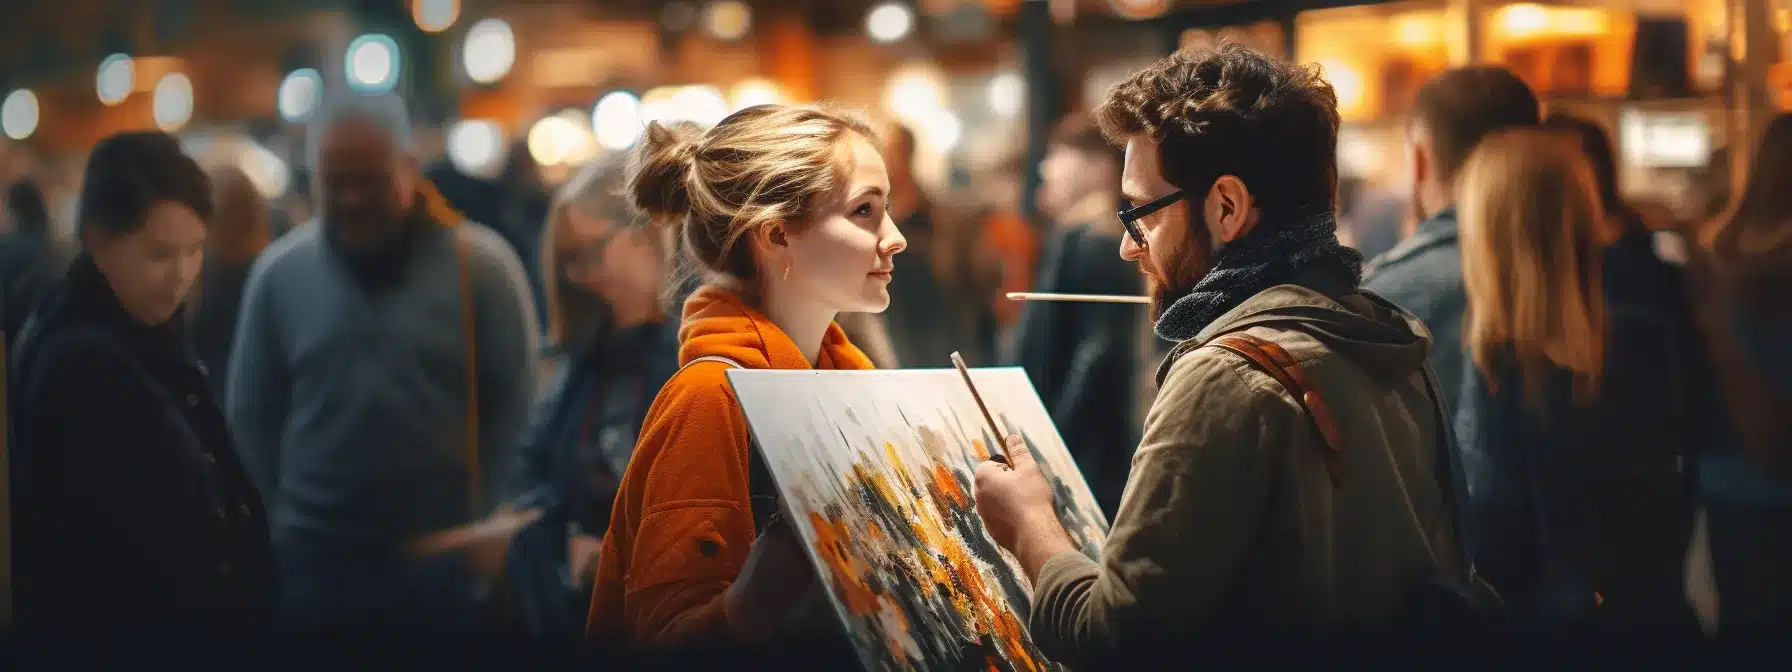 A Painter Artistically Incorporates Customer Experience Insights Into A Blank Canvas, Creating A Captivating Masterpiece To Attract Passersby In A Crowded Marketplace.